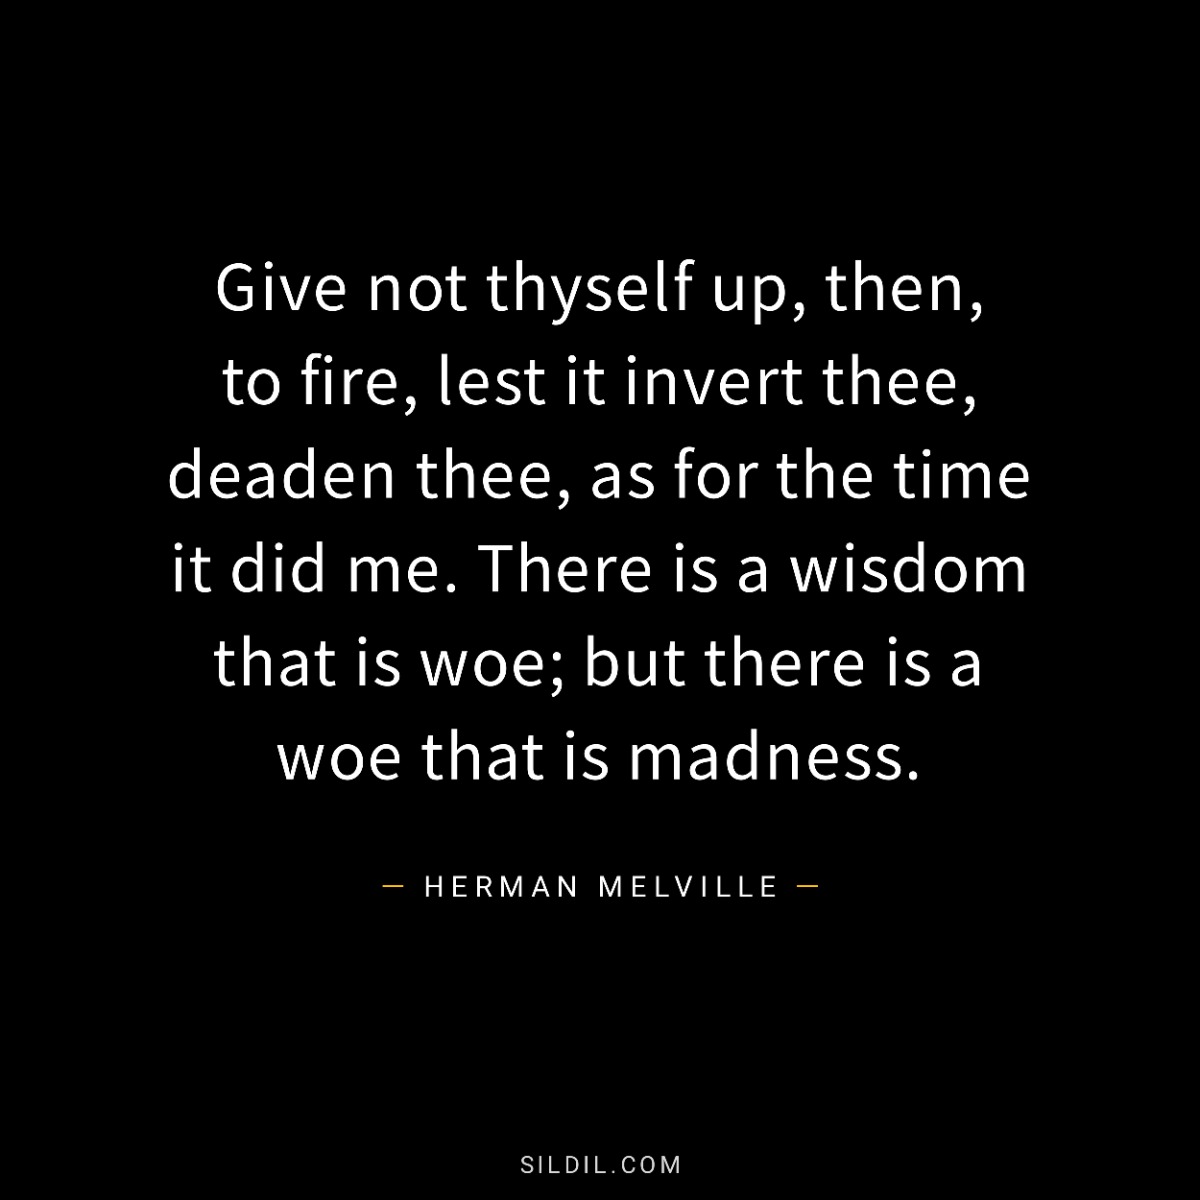 Give not thyself up, then, to fire, lest it invert thee, deaden thee, as for the time it did me. There is a wisdom that is woe; but there is a woe that is madness.